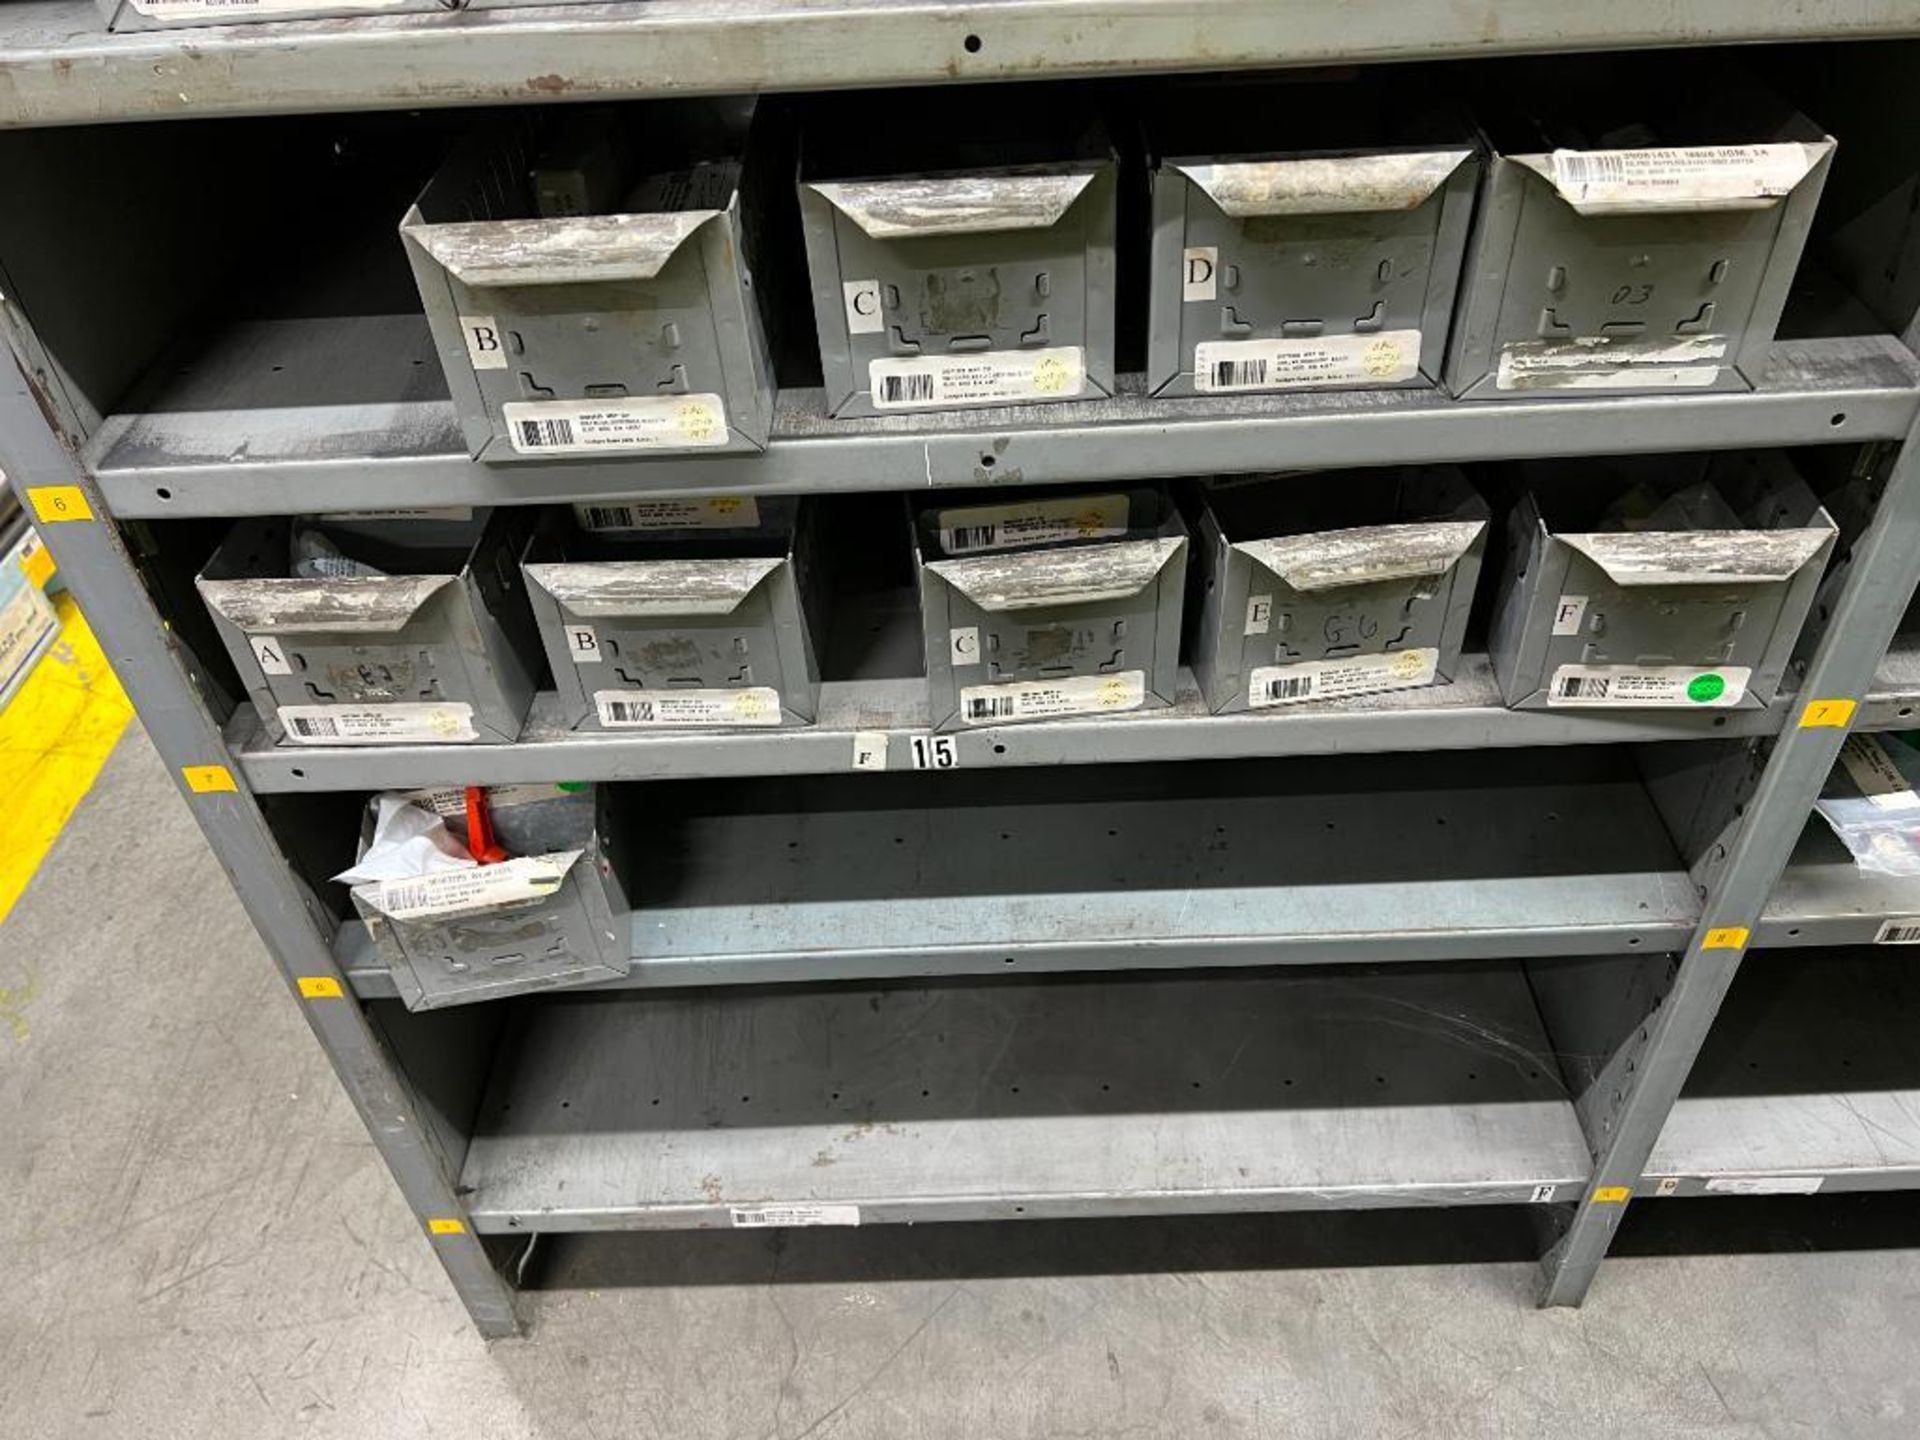 contents of gray shelving units to include, bearings, shafts, filters, fuses, pneumatic scale parts, - Image 110 of 141